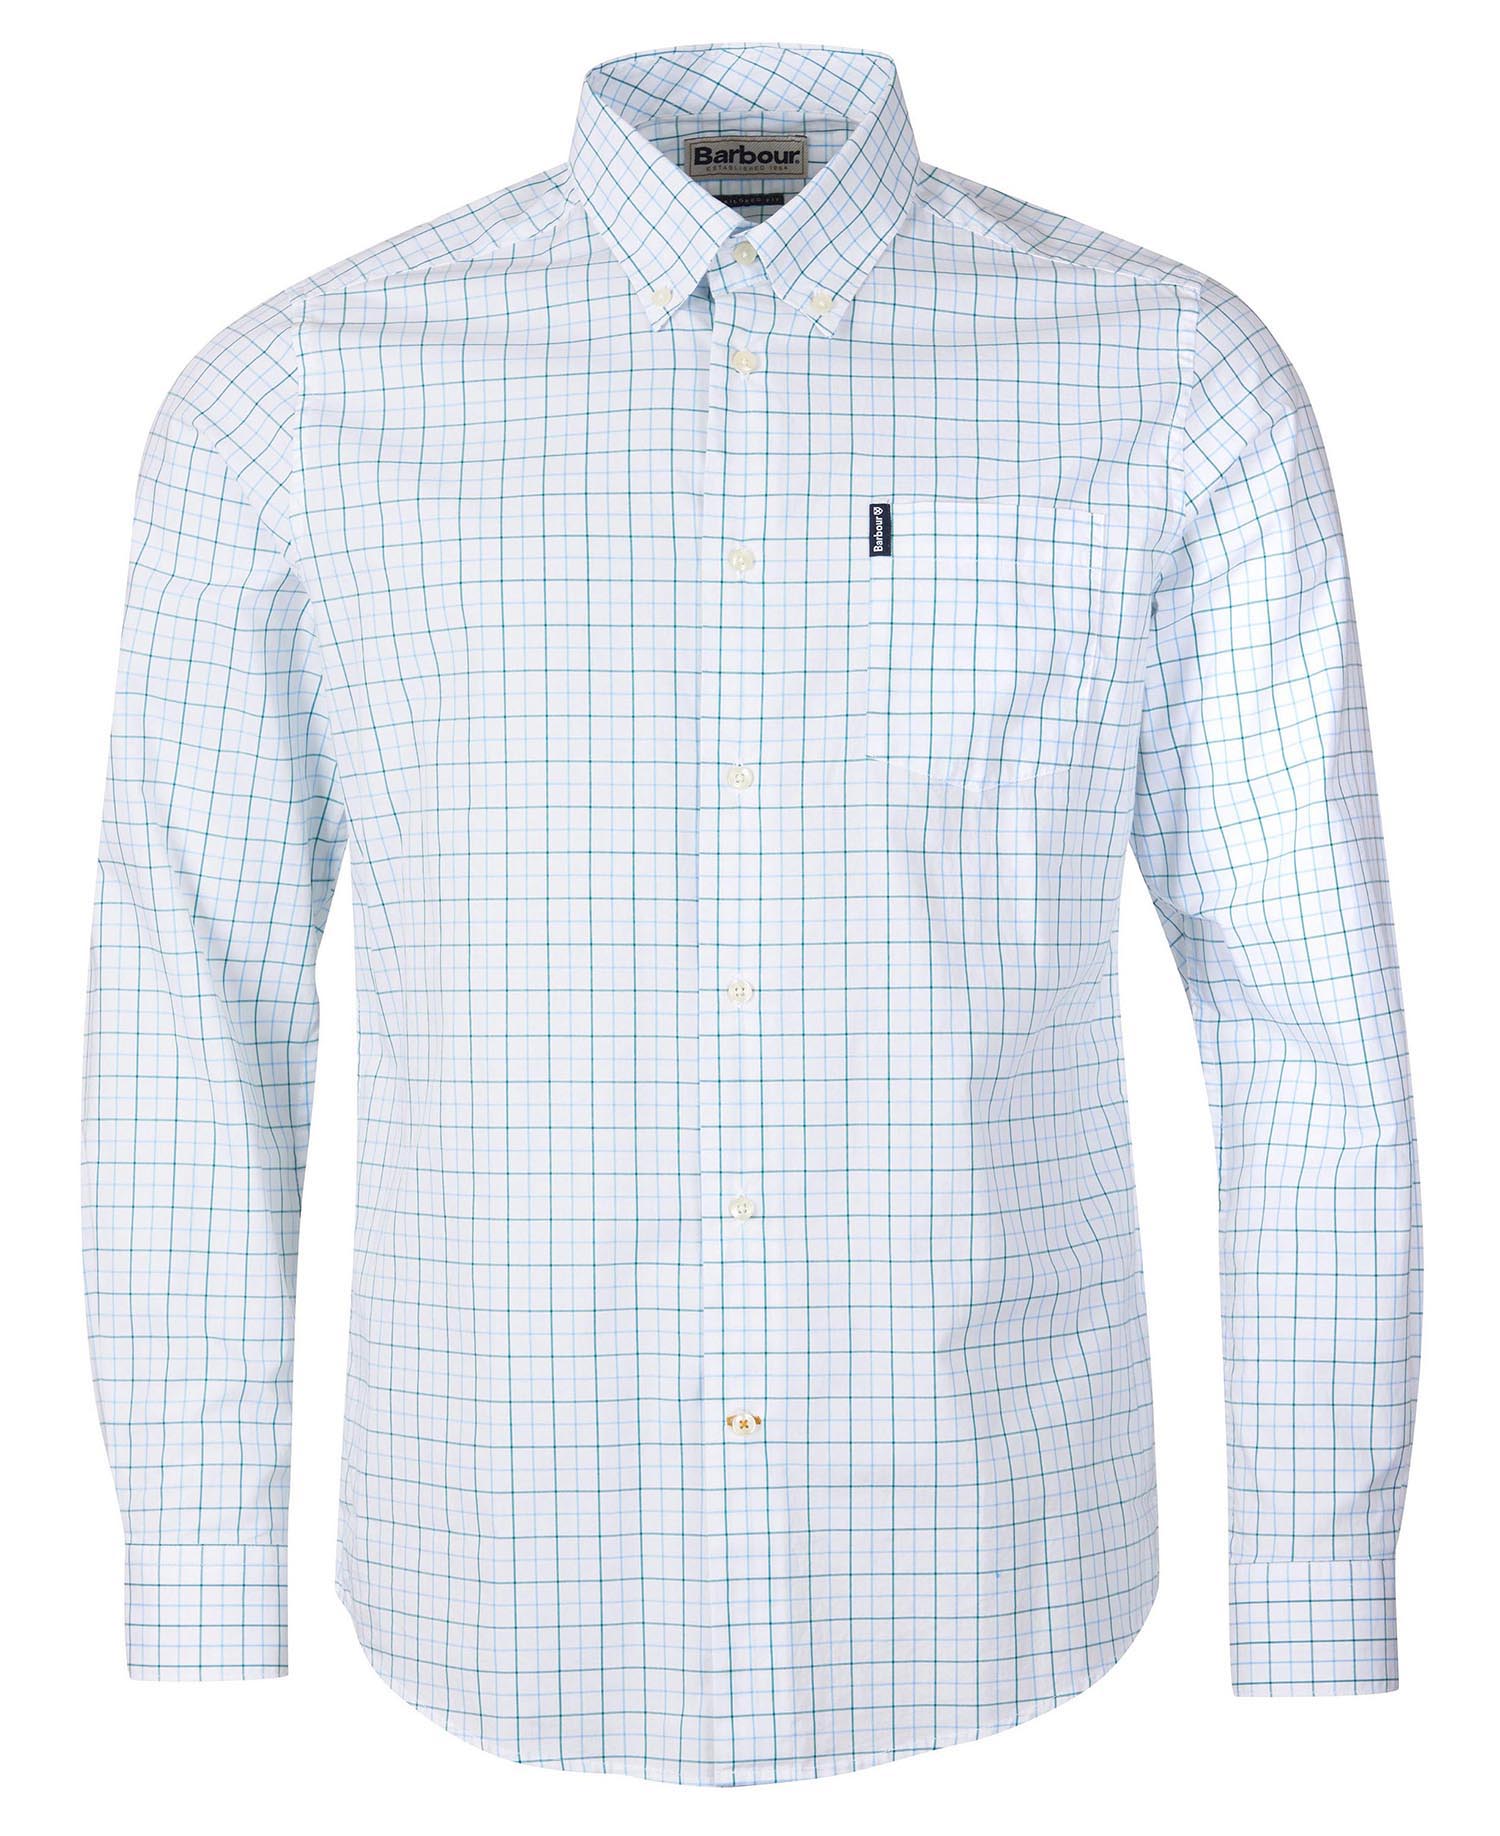 Barbour Tattersall 16 Tailored Shirt in 